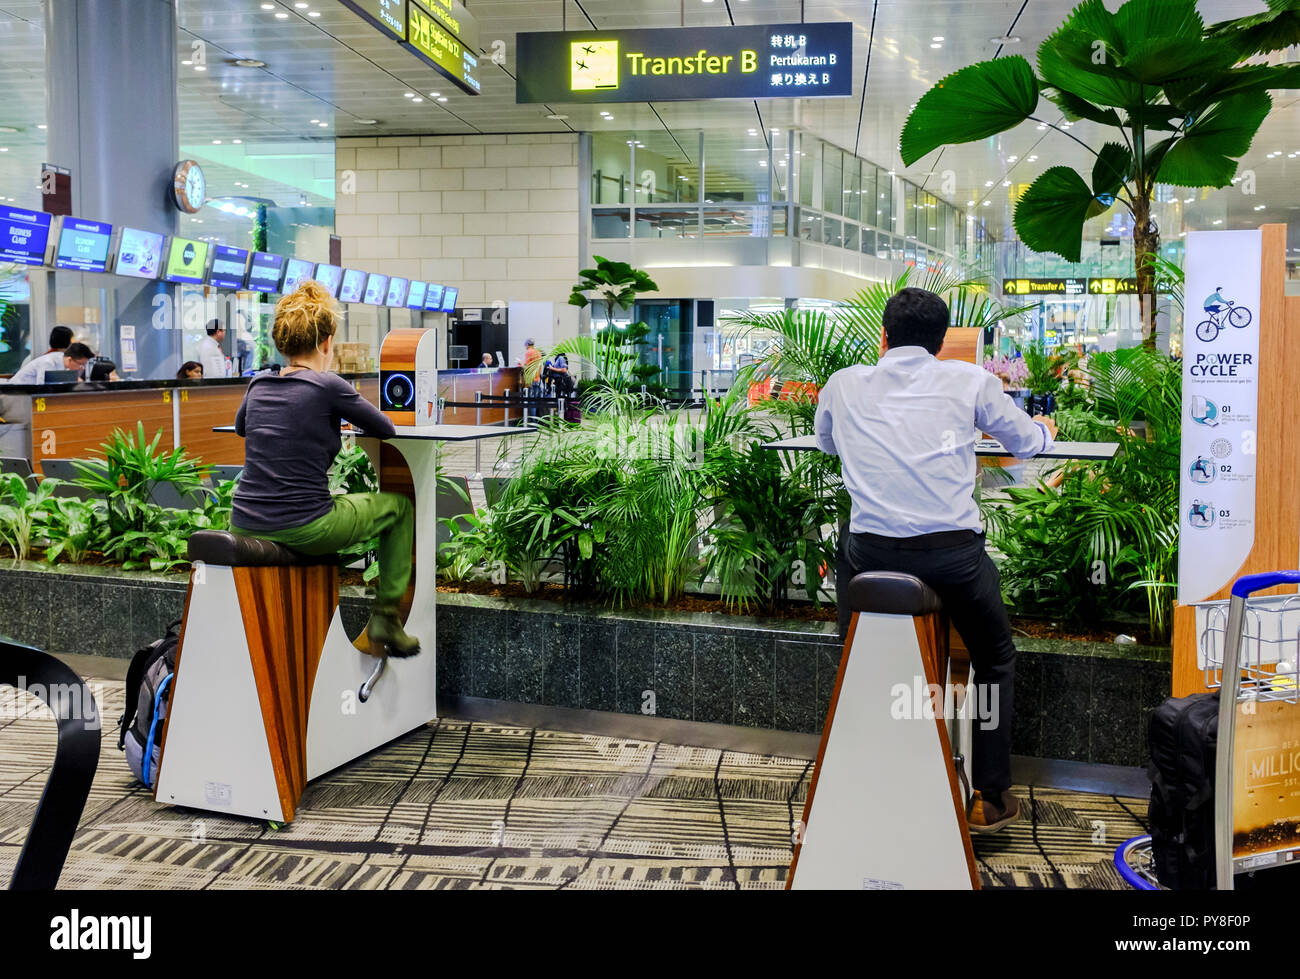 Backpacker and businessman pedalling at power cycle station to charge devices at Singapore airport, Sept 2018 Stock Photo